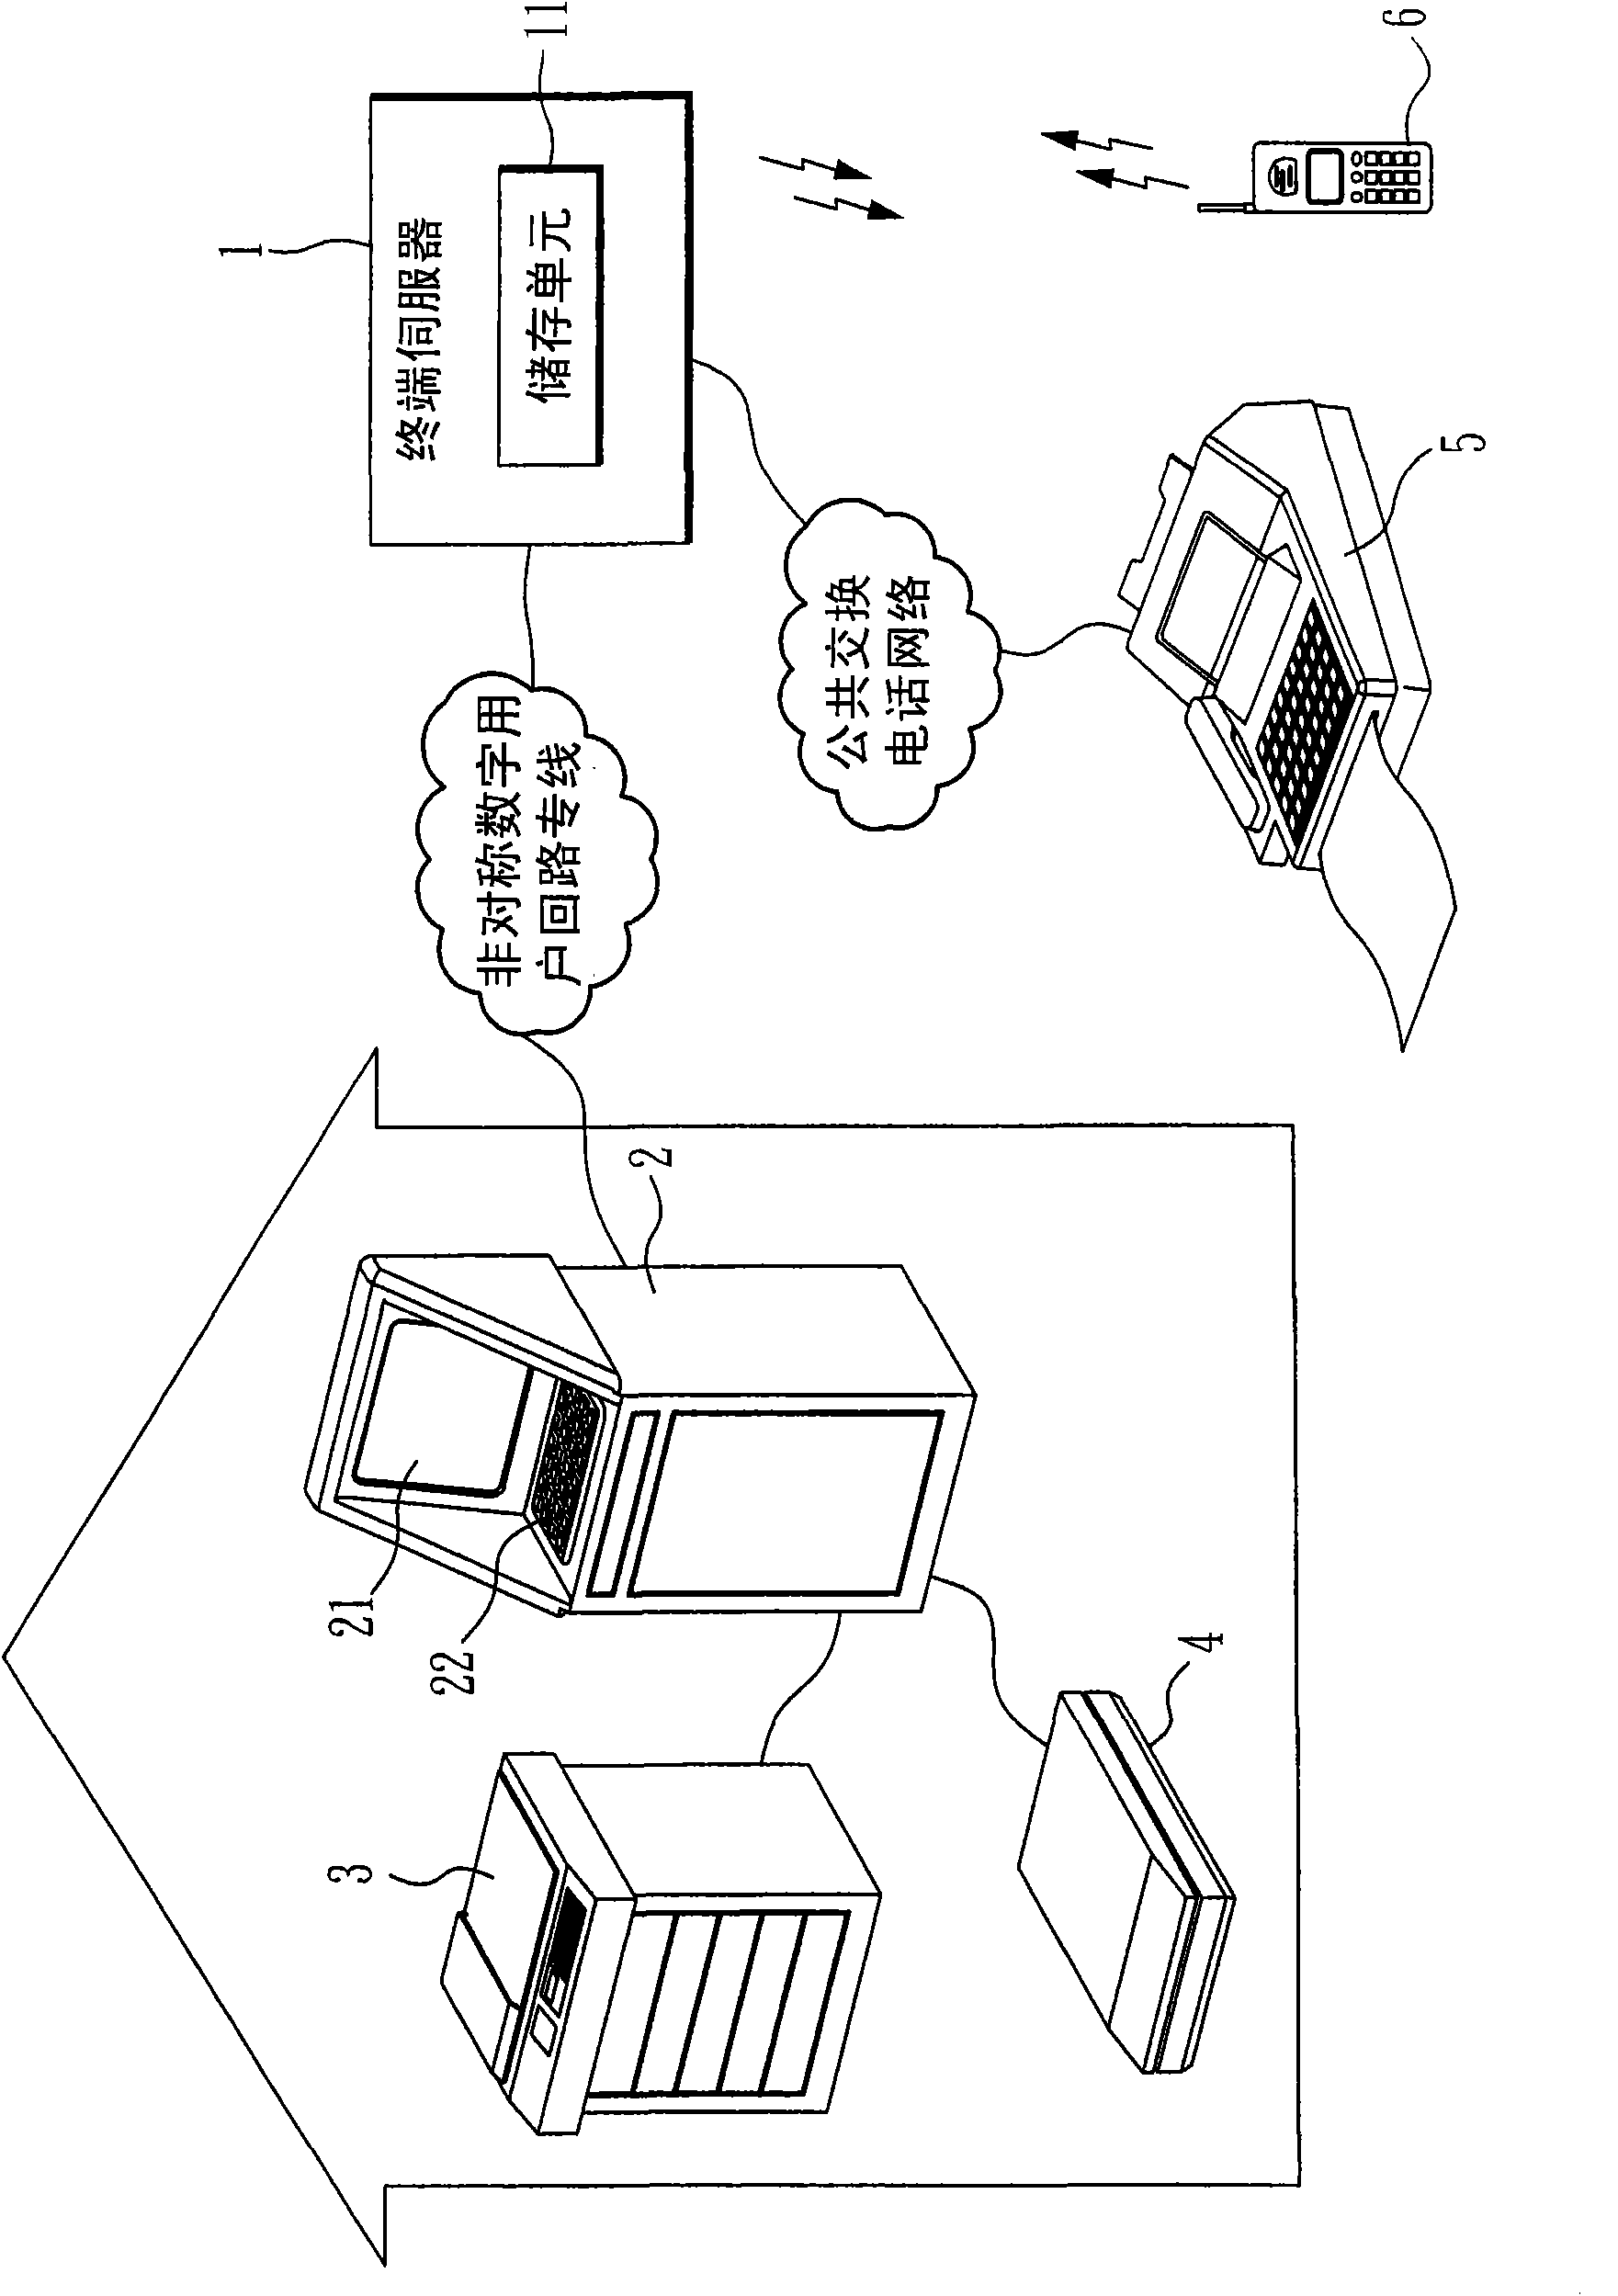 Personal fax receiving system